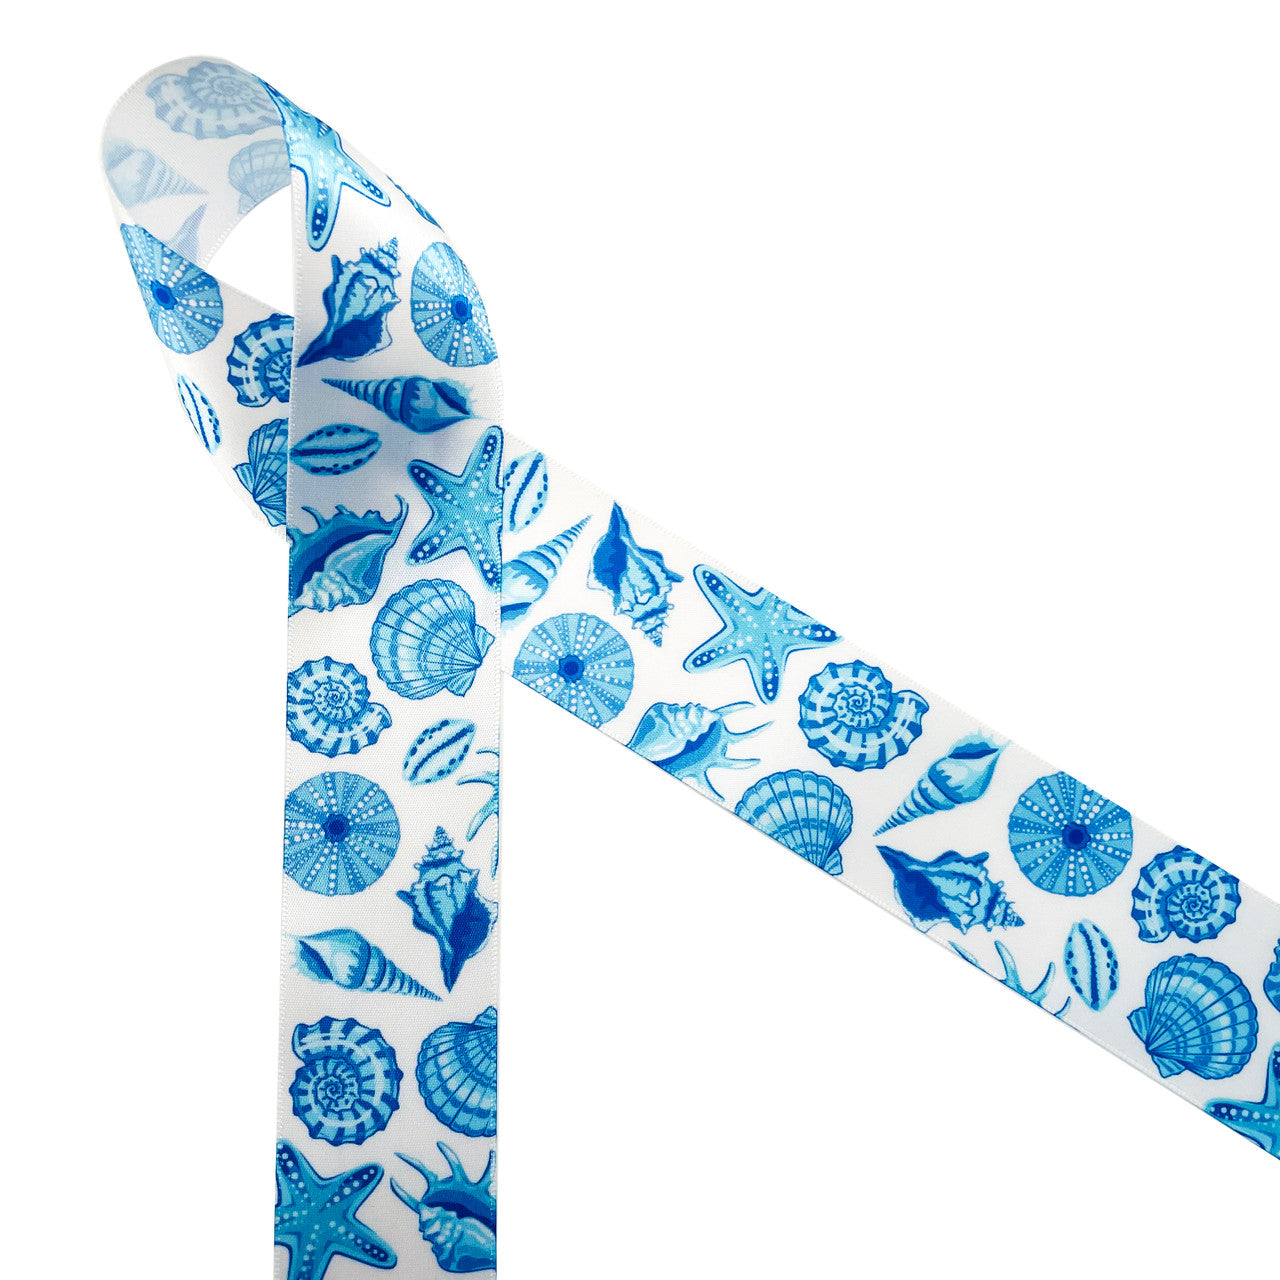 Seashells in blue printed on 1.5" white single face satin ribbon is  the ideal ribbon for Summer weddings, parties, home decor, gift wrap and quilting projects. This beautiful ribbon will make a big impact on all your Summer soirees! All our ribbon is designed and printed in the USA